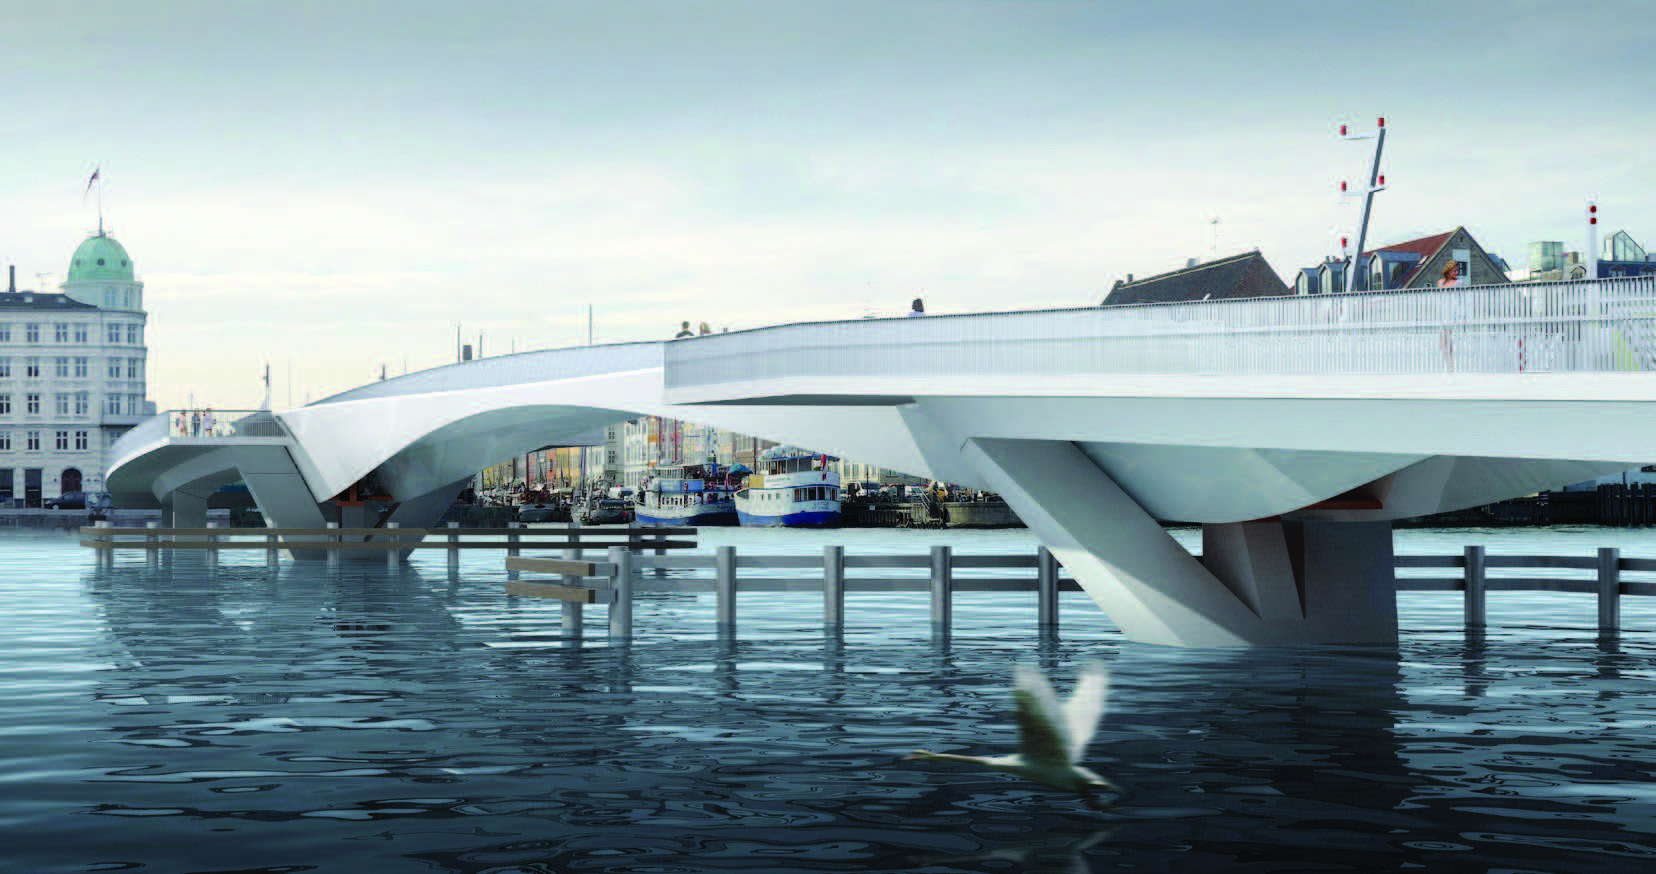 figure 3.6 Inderhavnen Bridge. View of the winning competition proposal